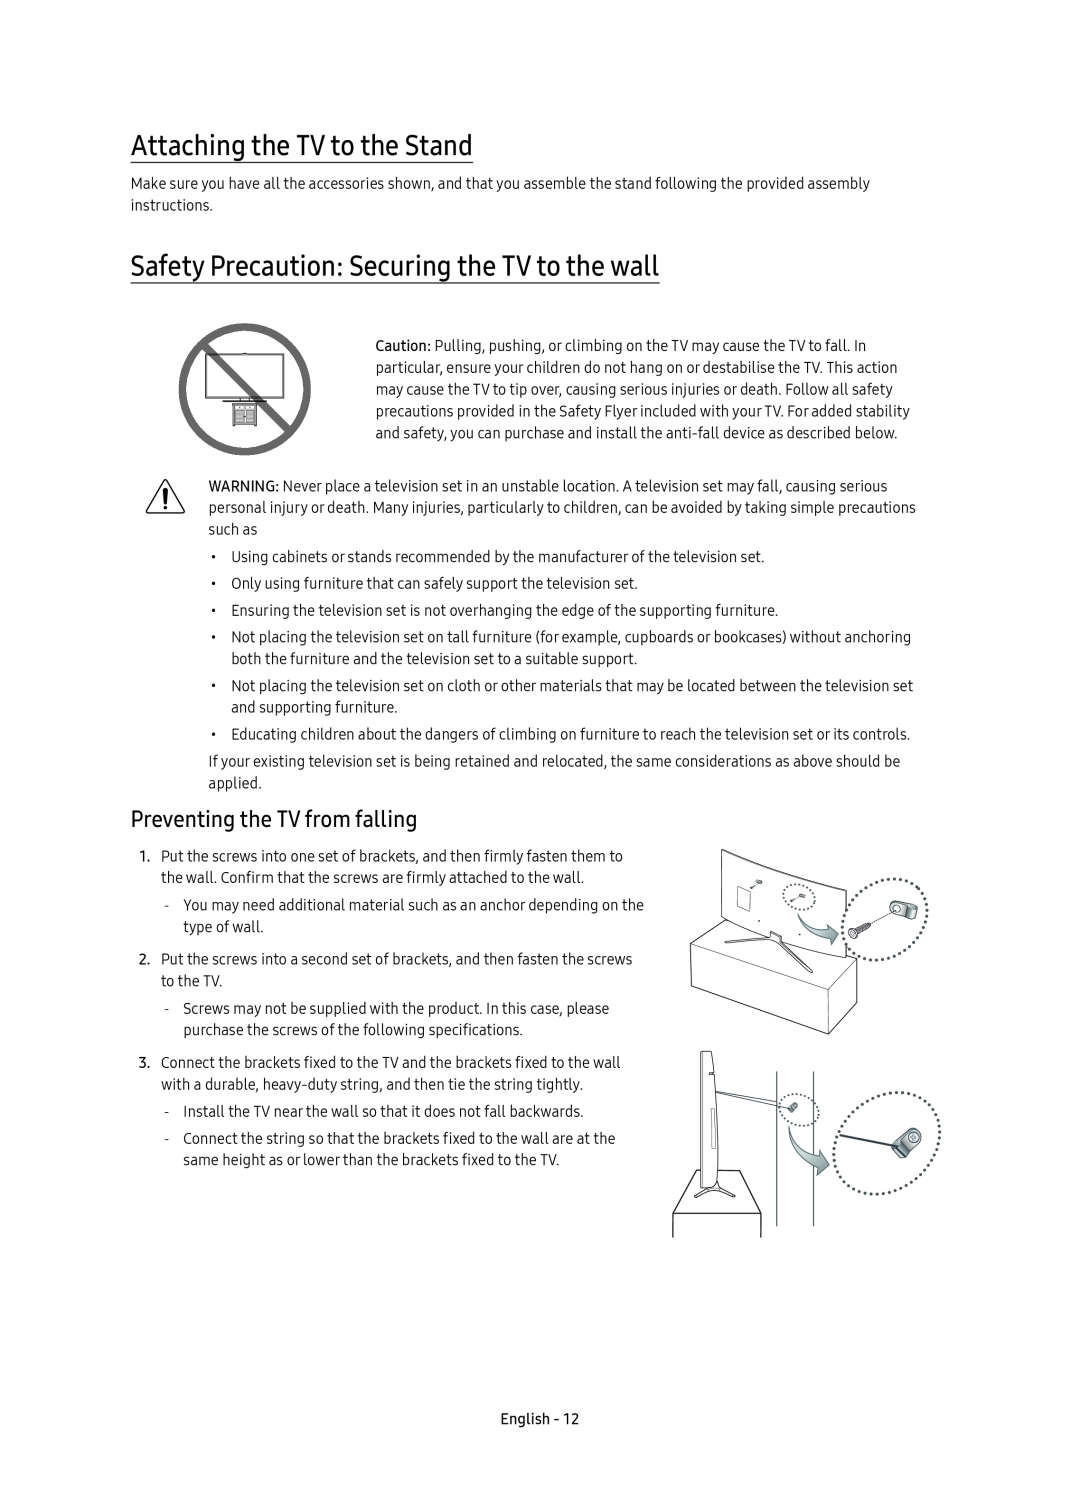 Samsung UE49K6379SUXZG manual Attaching the TV to the Stand, Safety Precaution Securing the TV to the wall, English 